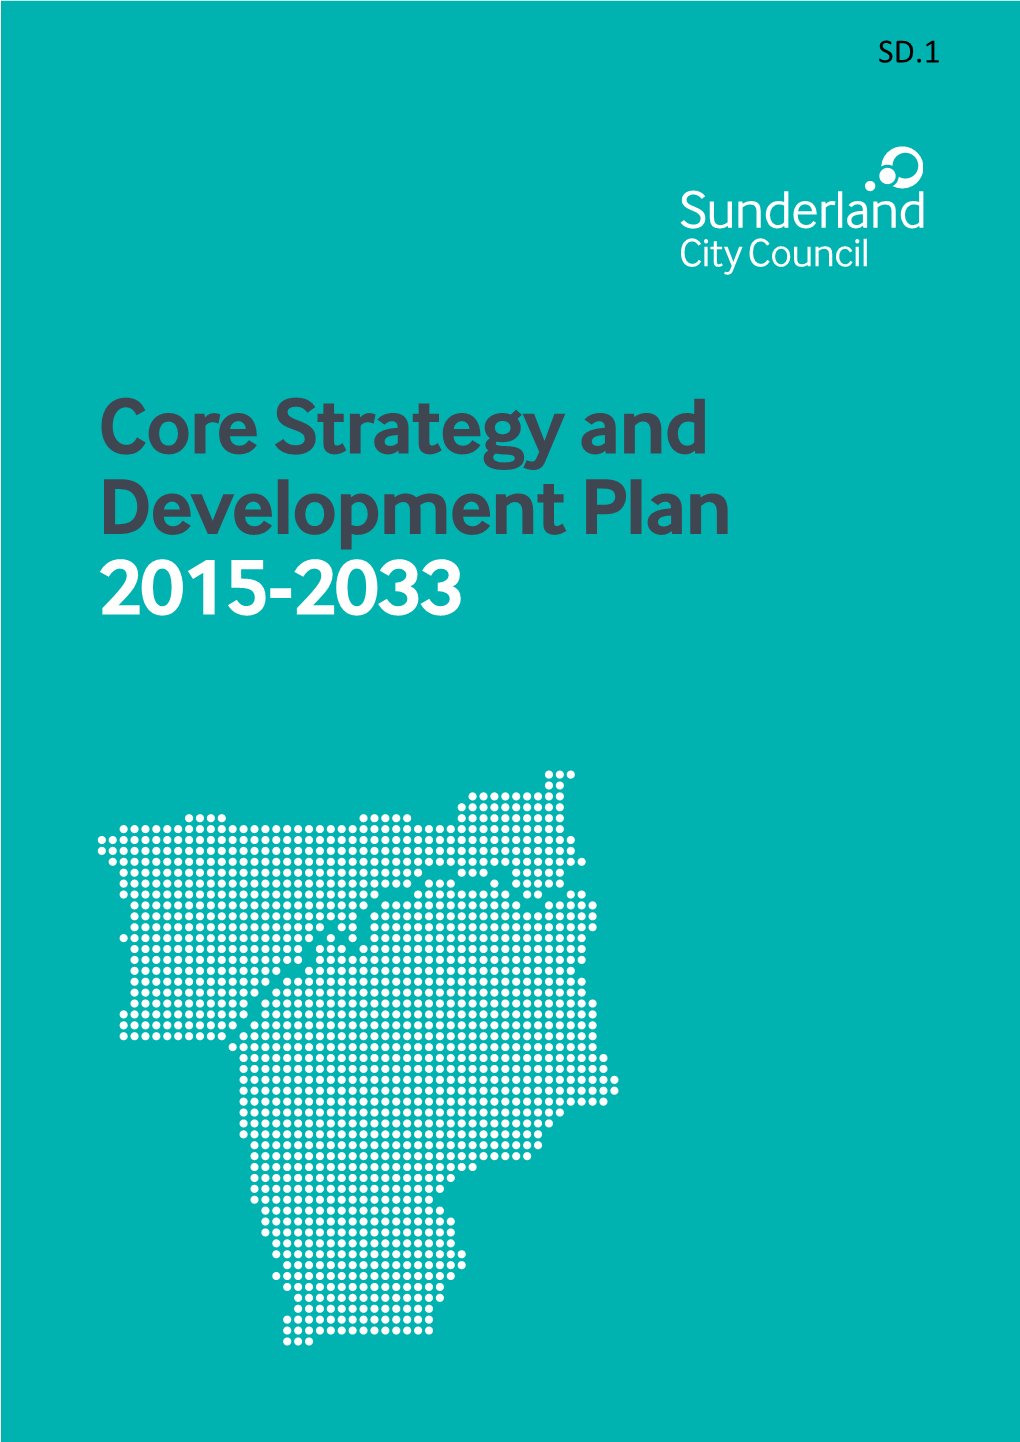 Oce21157 Core Strategy and Development Plan Publication